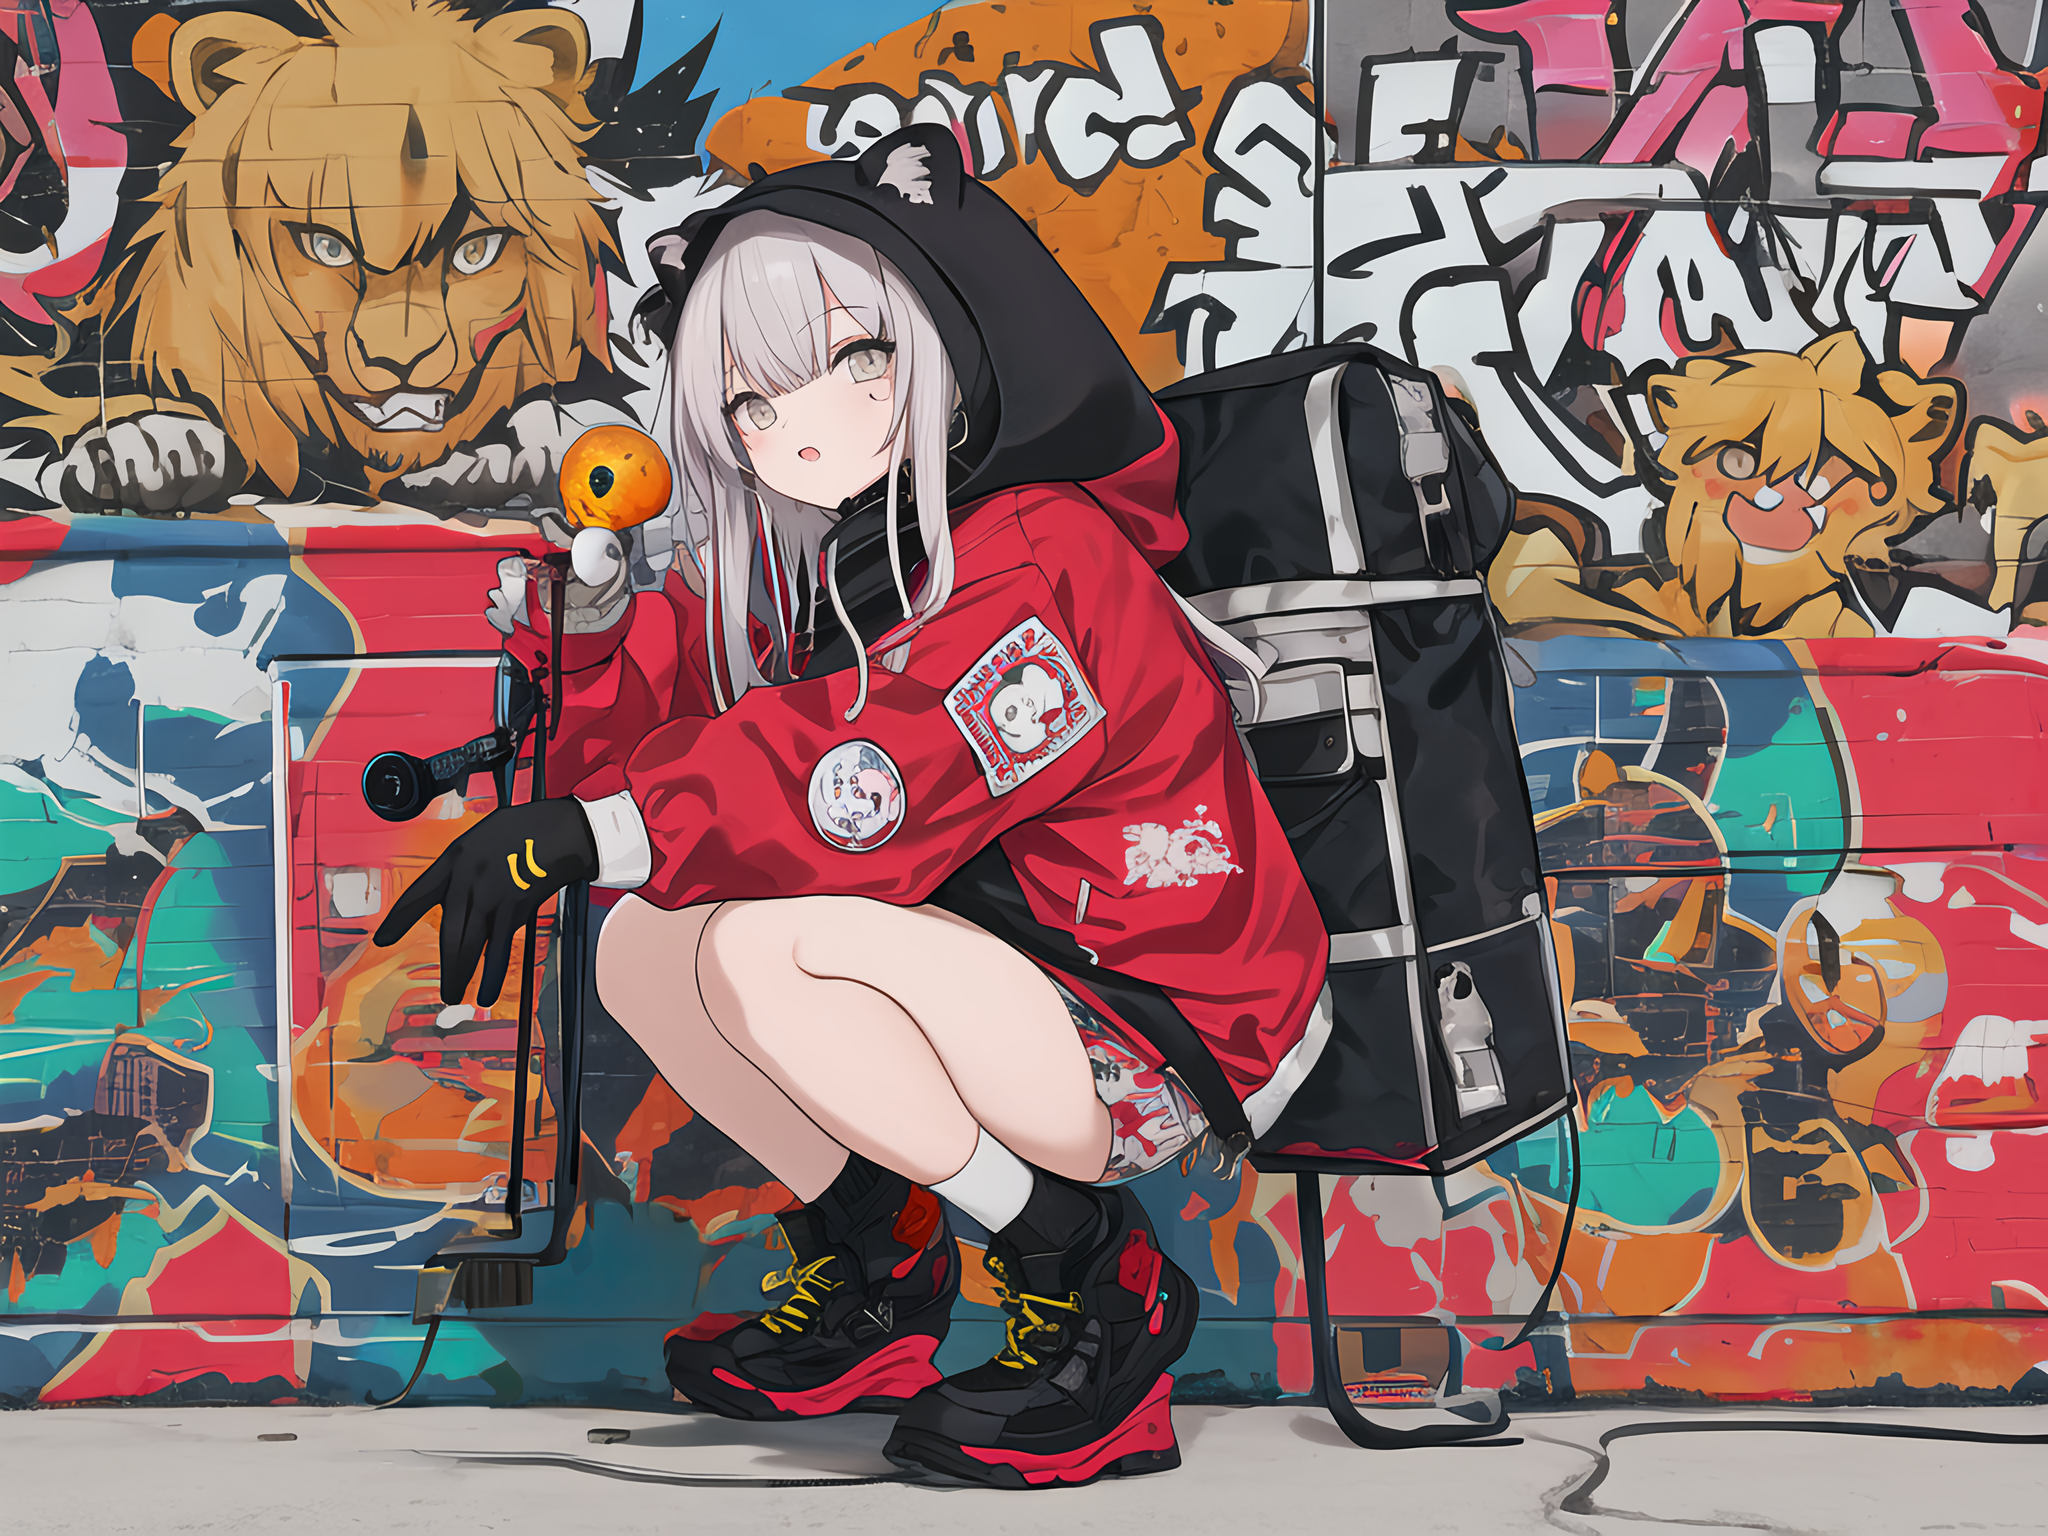 Anime Cartoons Graffiti wallpaper  Download Best Free pictures